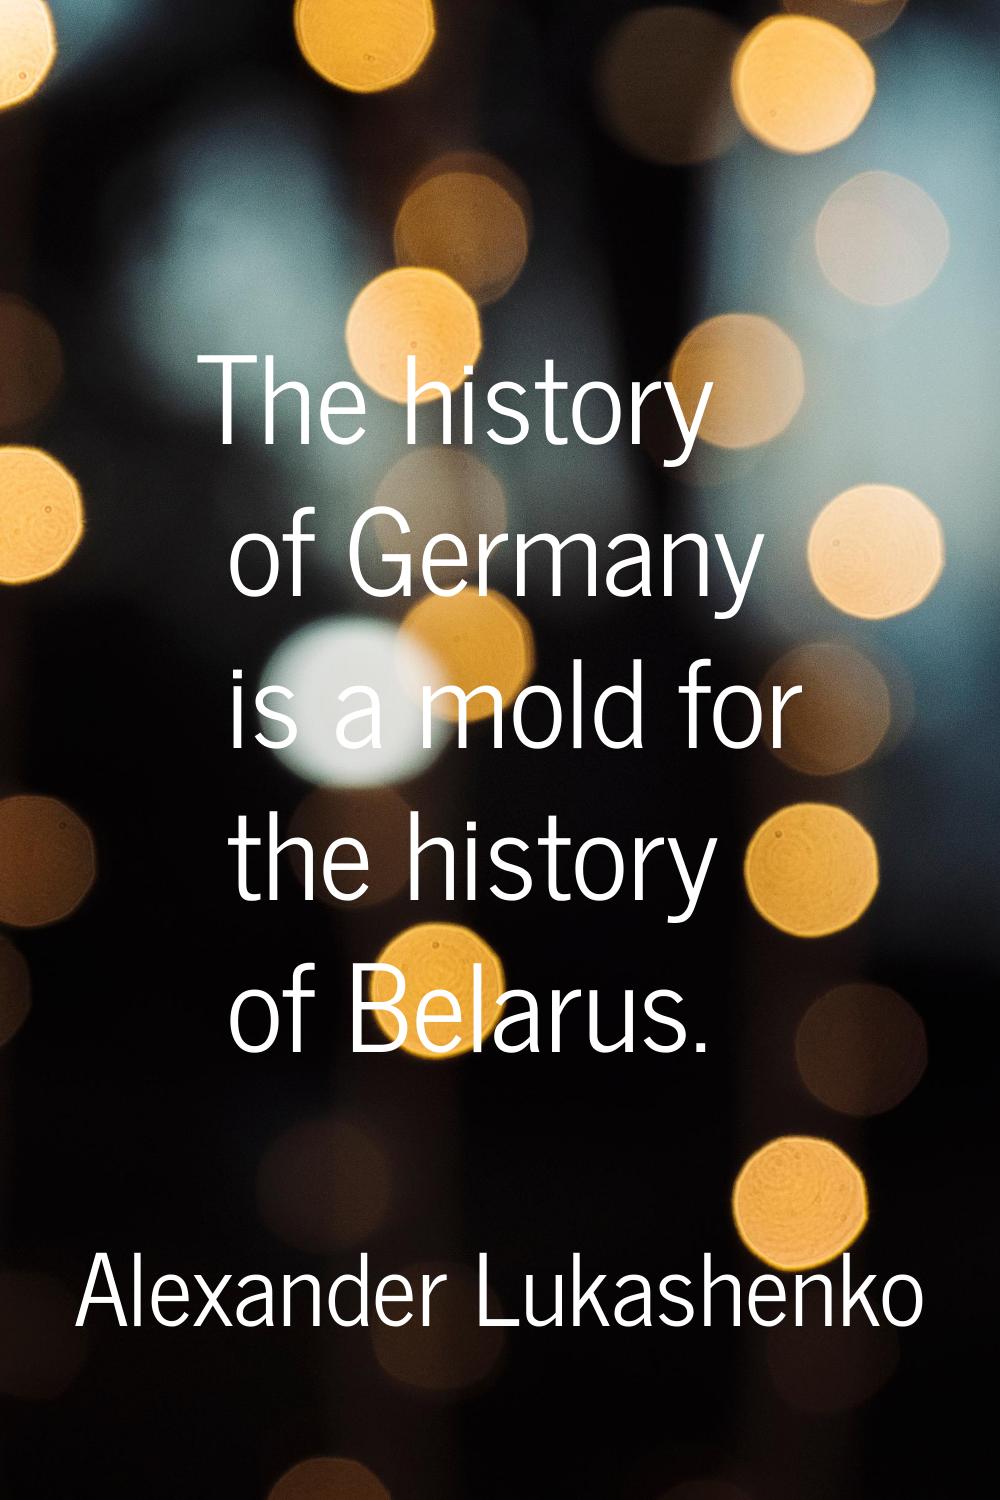 The history of Germany is a mold for the history of Belarus.